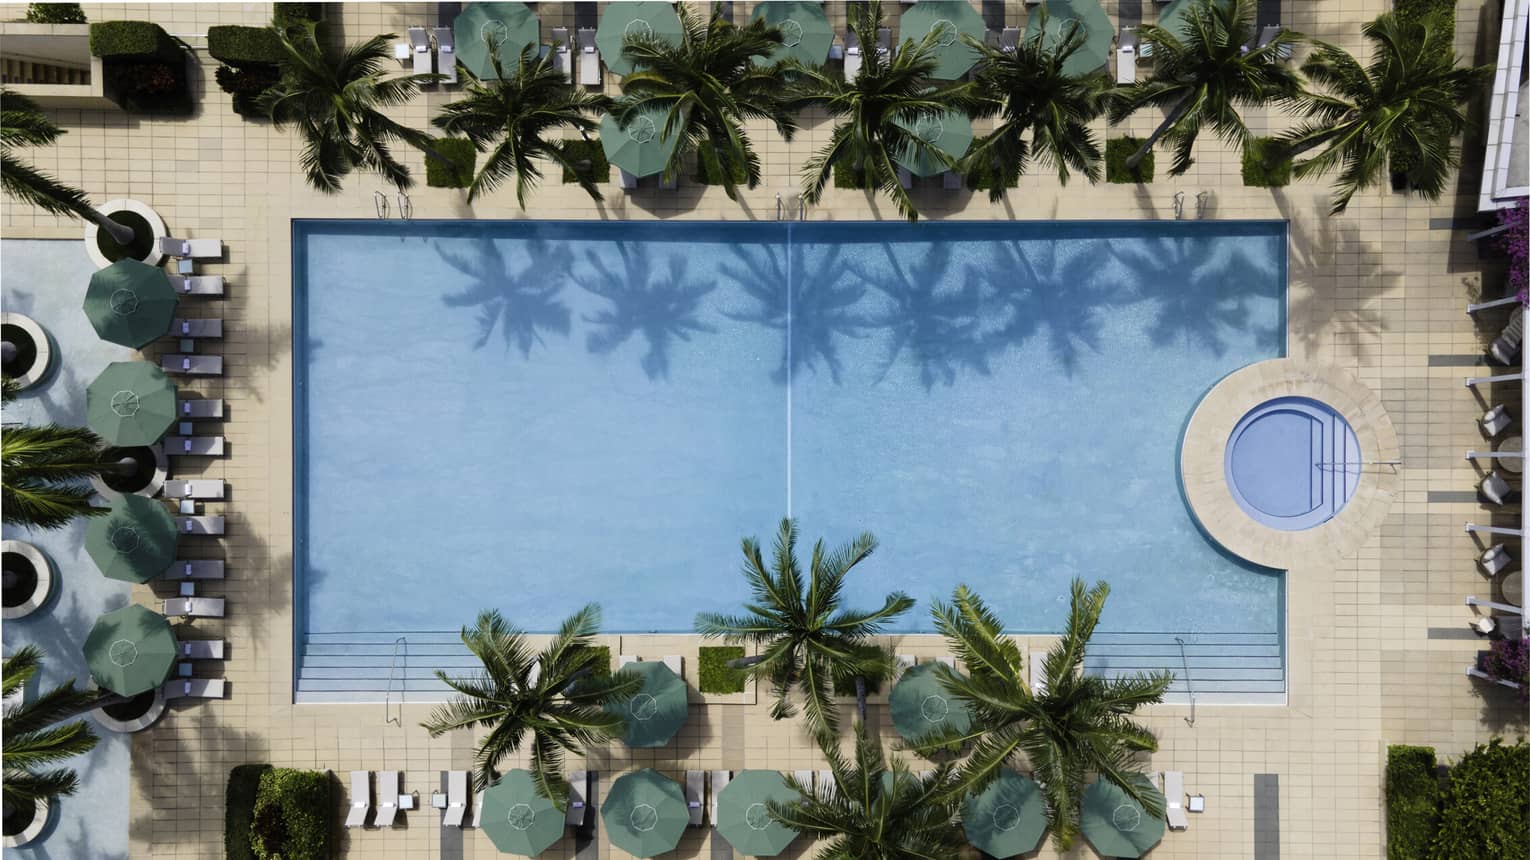 Aerial view of a luxurious rectangular swimming pool surrounded by palm trees and lounge chairs at the Four Seasons Hotel in Miami. The pool water reflects the palm tree silhouettes, enhancing the tropical ambiance.